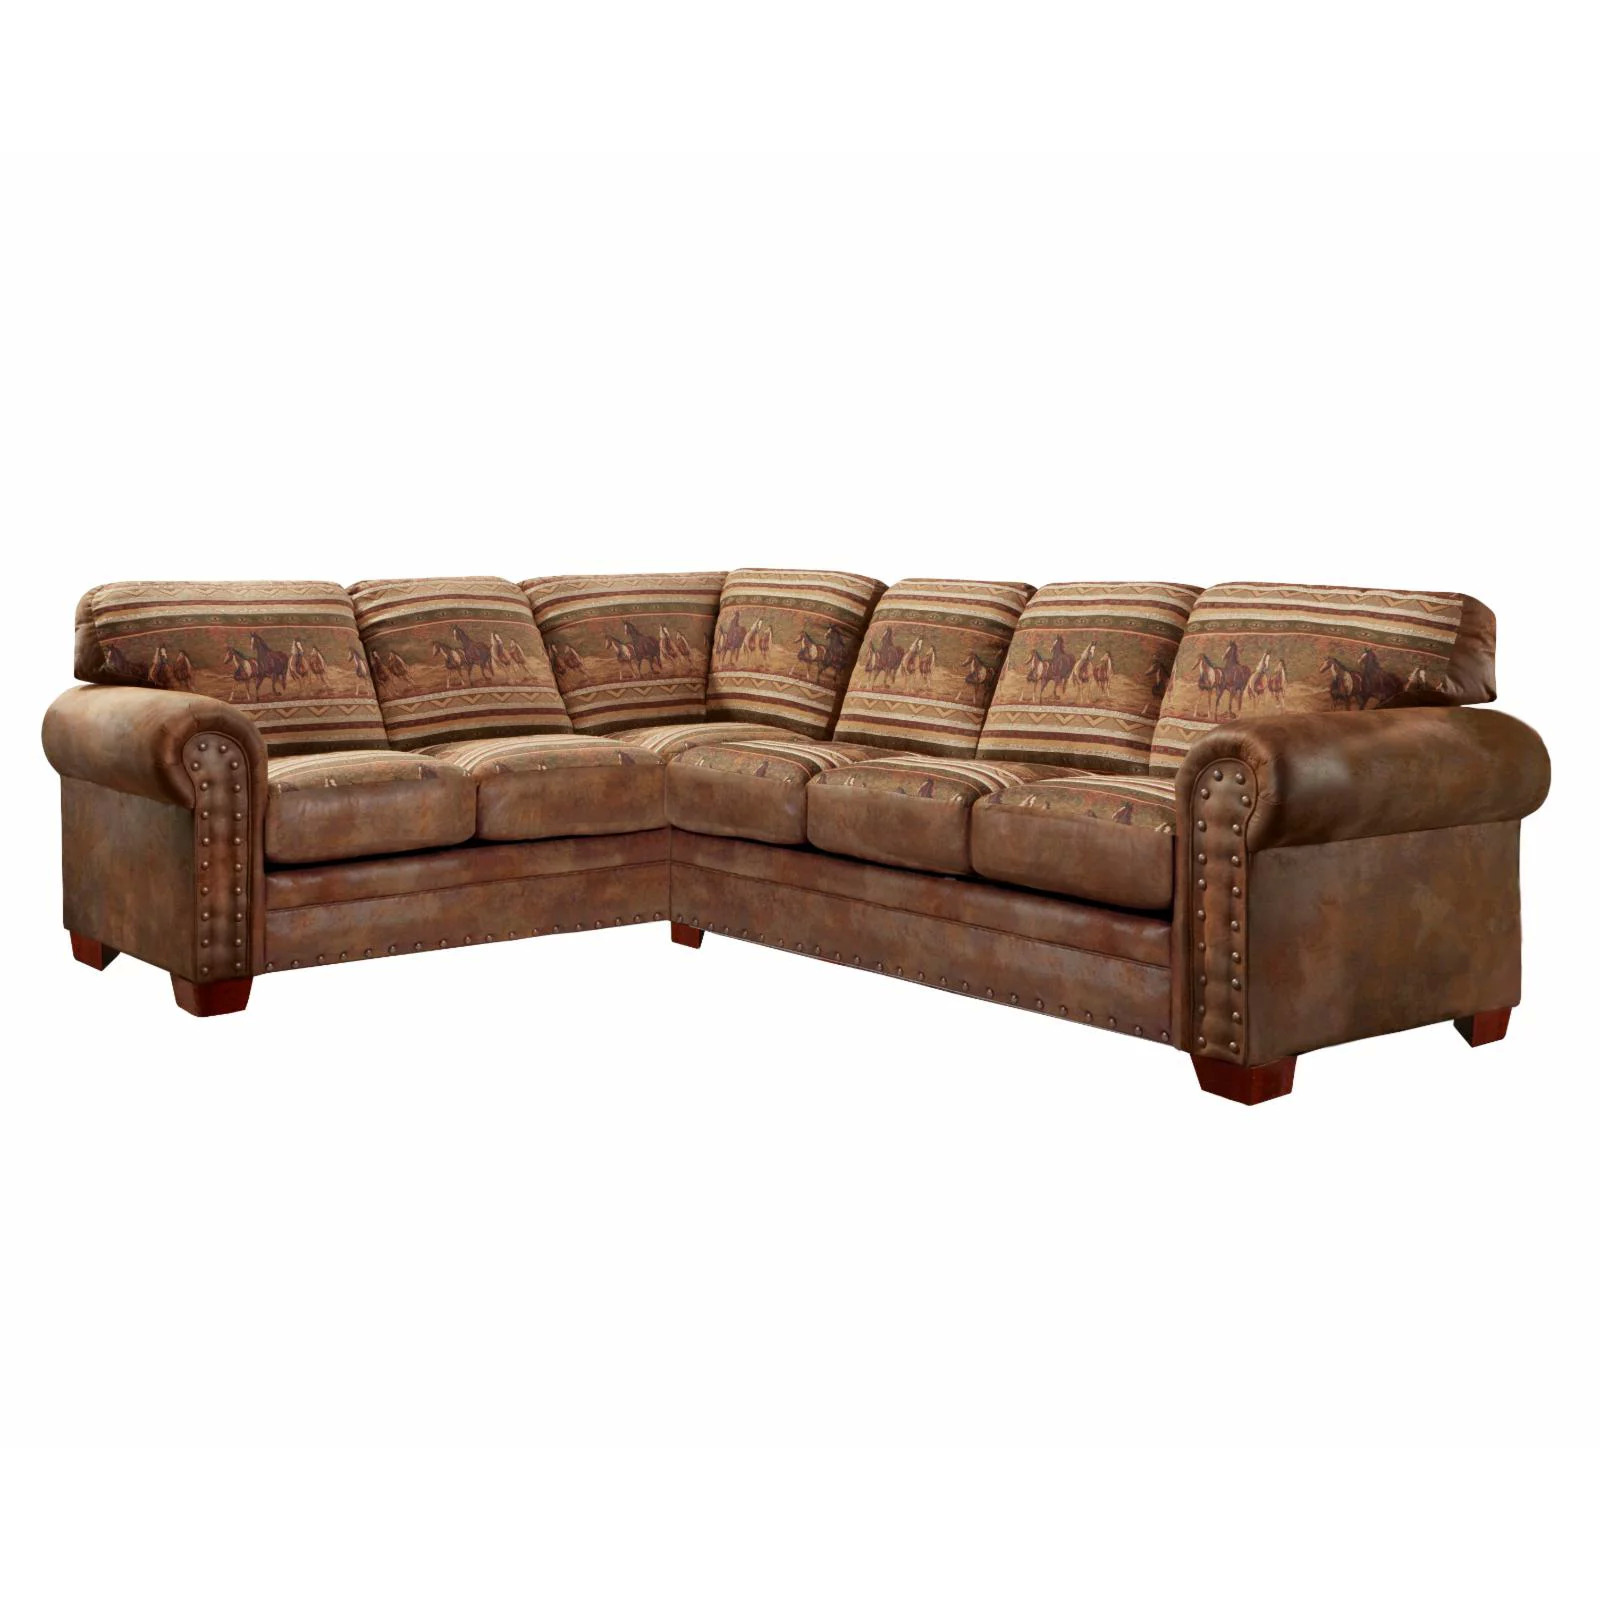 American Furniture Classics Wild Horses Two Piece Sectional Sofa $644 + Free Shipping